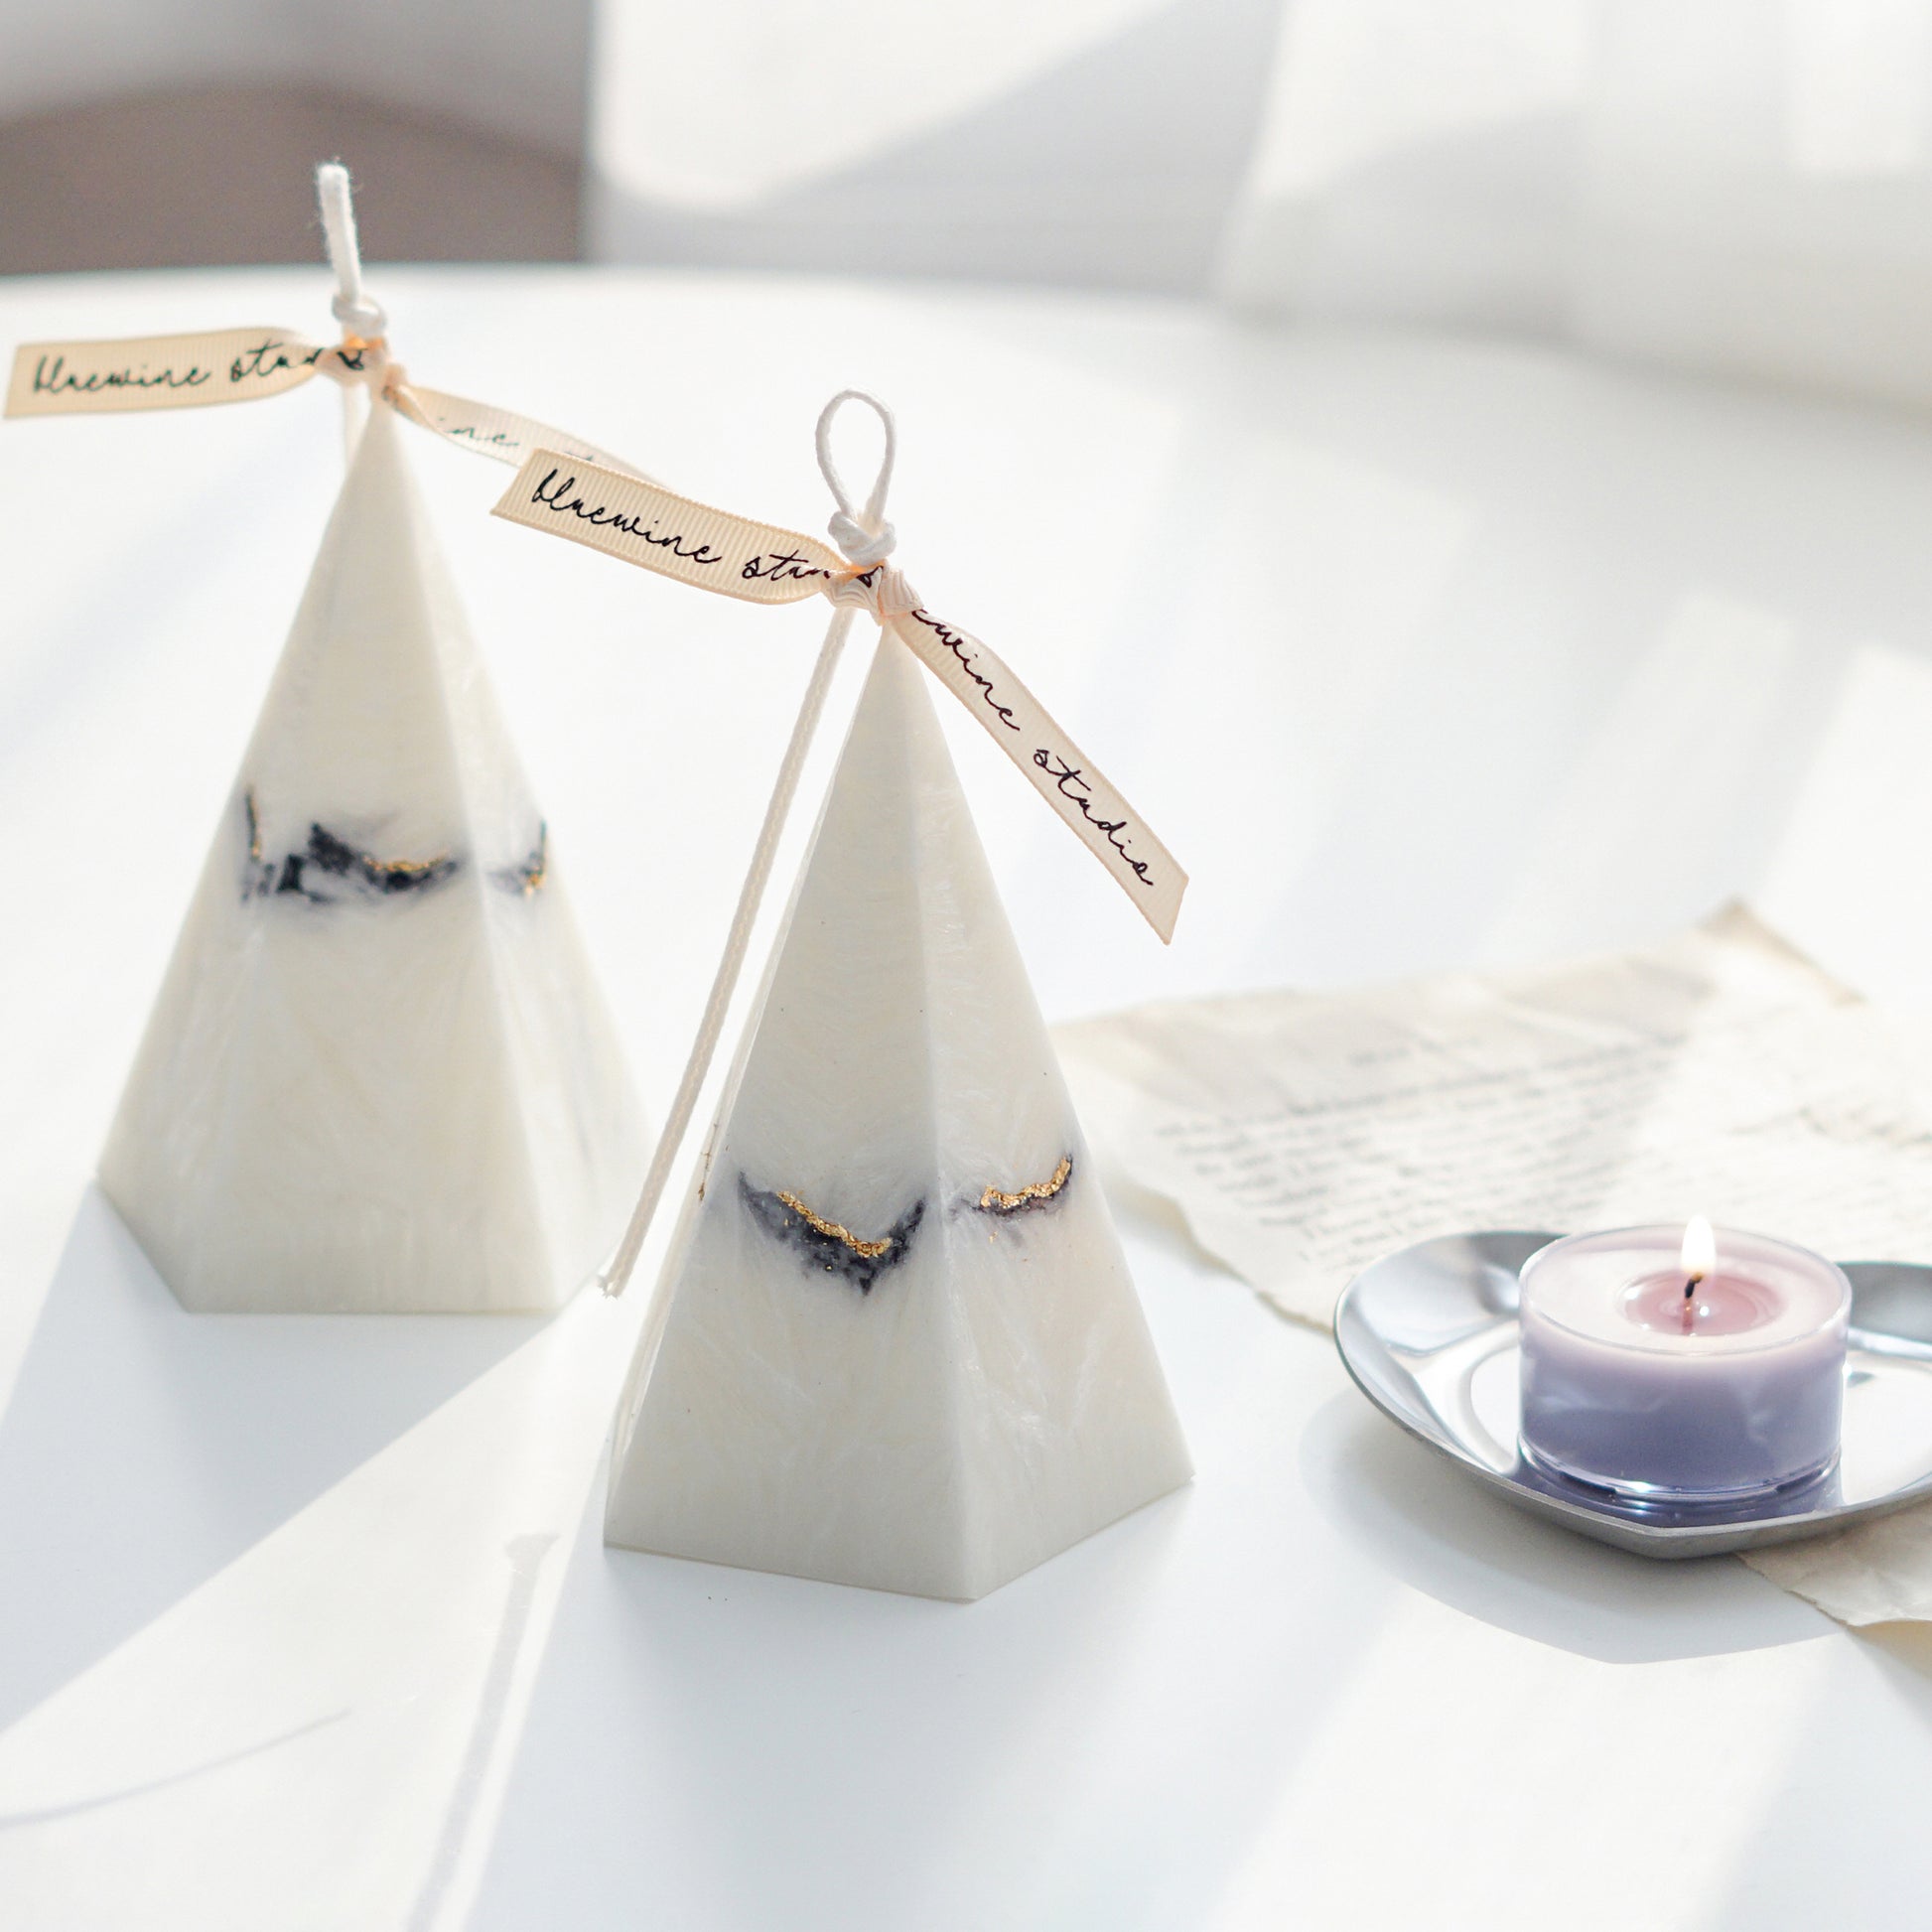 two pentagonal pyramid shape marble candles with gold glitters and lavender color lit tealight candle on a silver heart shape tray